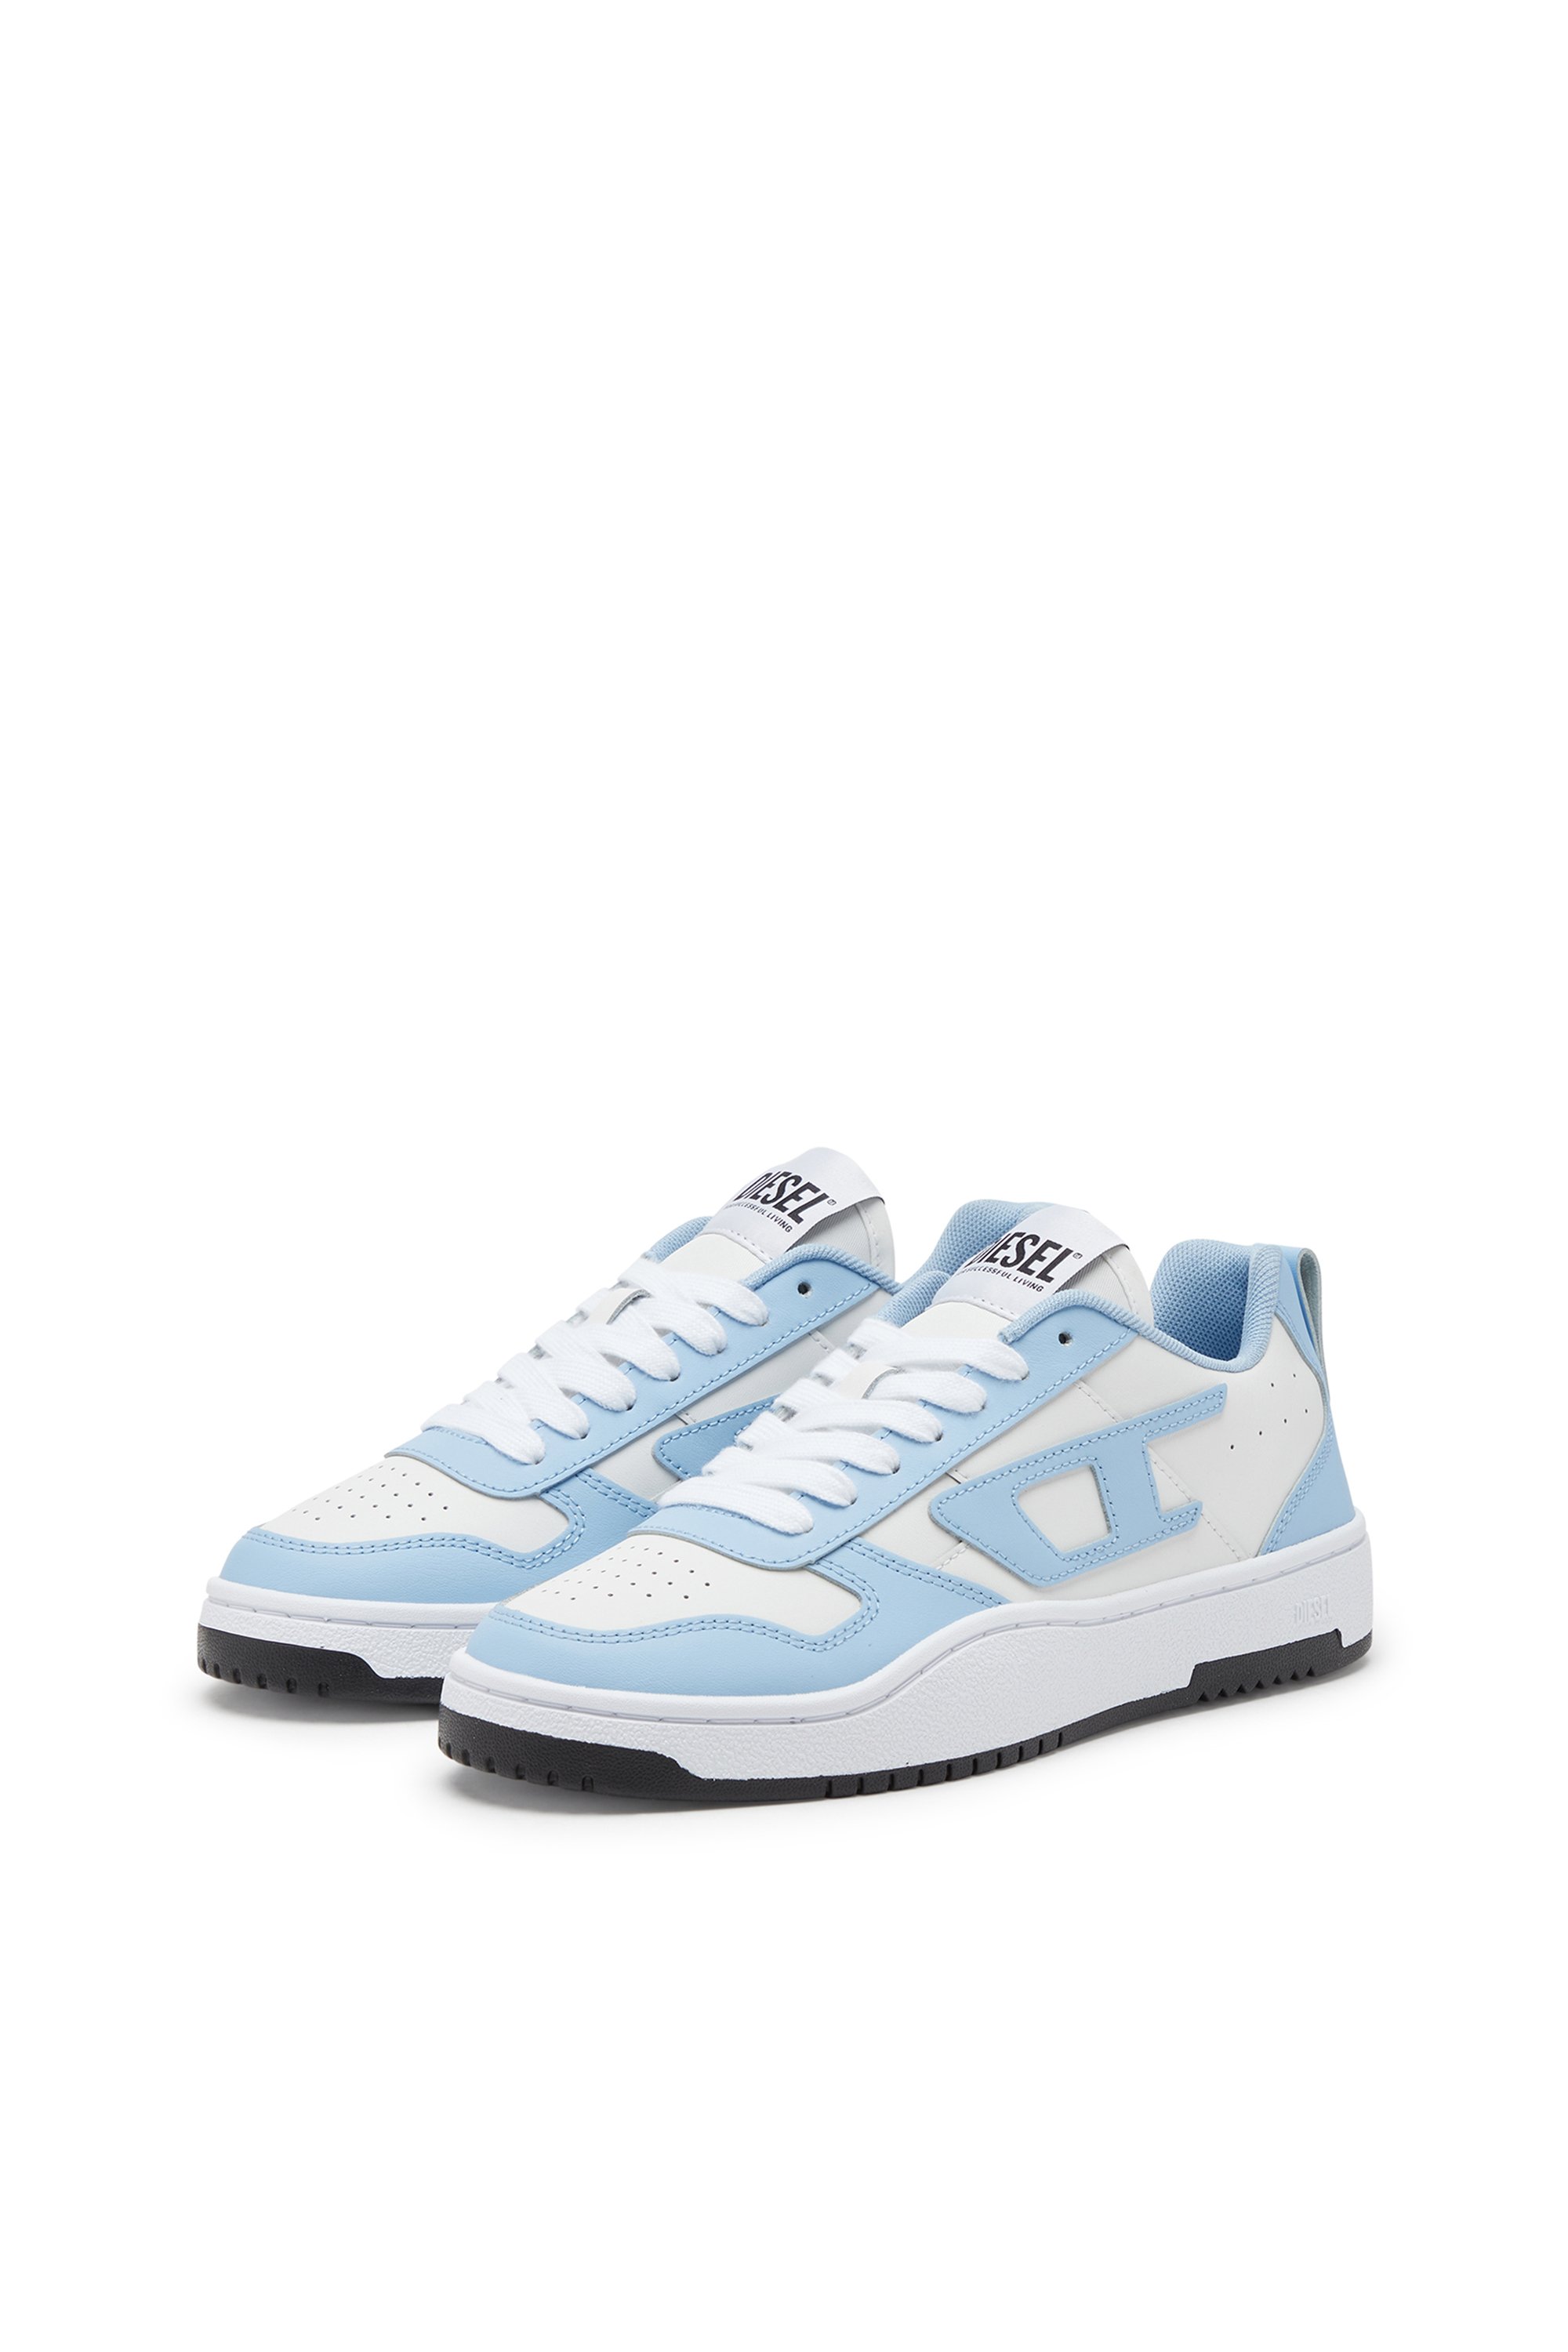 Diesel - S-UKIYO V2 LOW W, Woman S-Ukiyo Low-Low-top sneakers in leather and nylon in Multicolor - Image 8